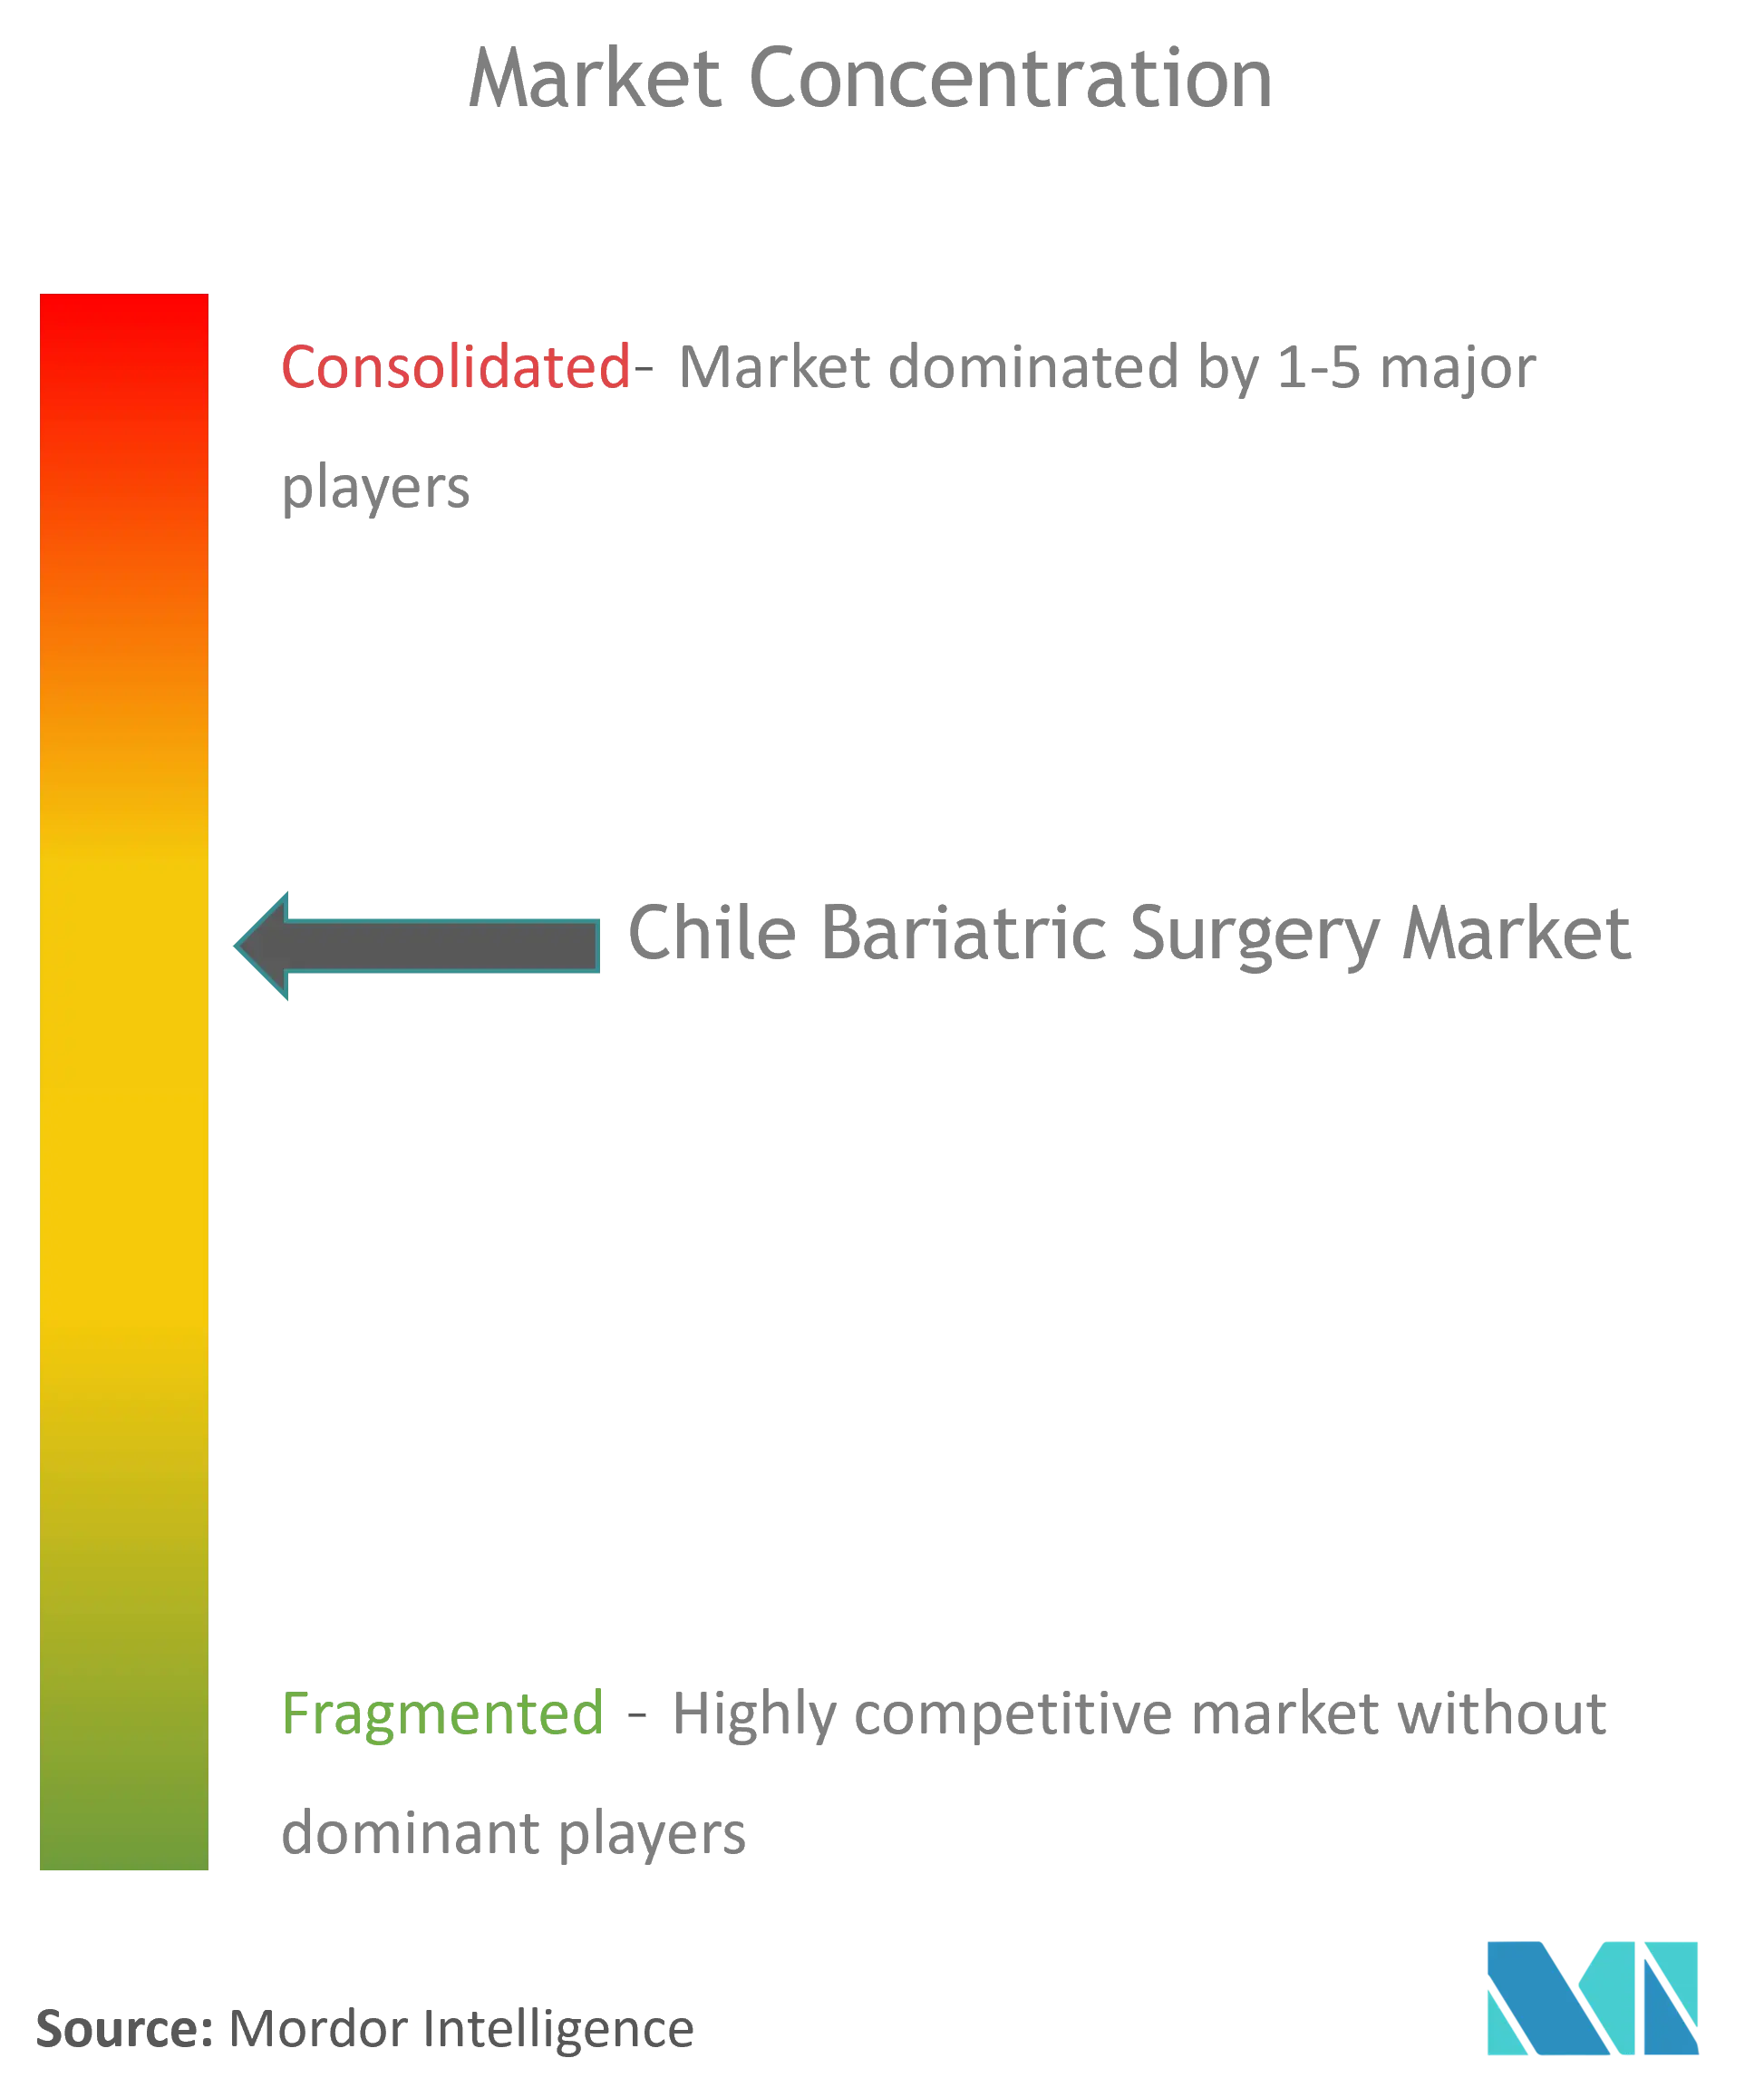 Chile Bariatric Surgery Market Concentration